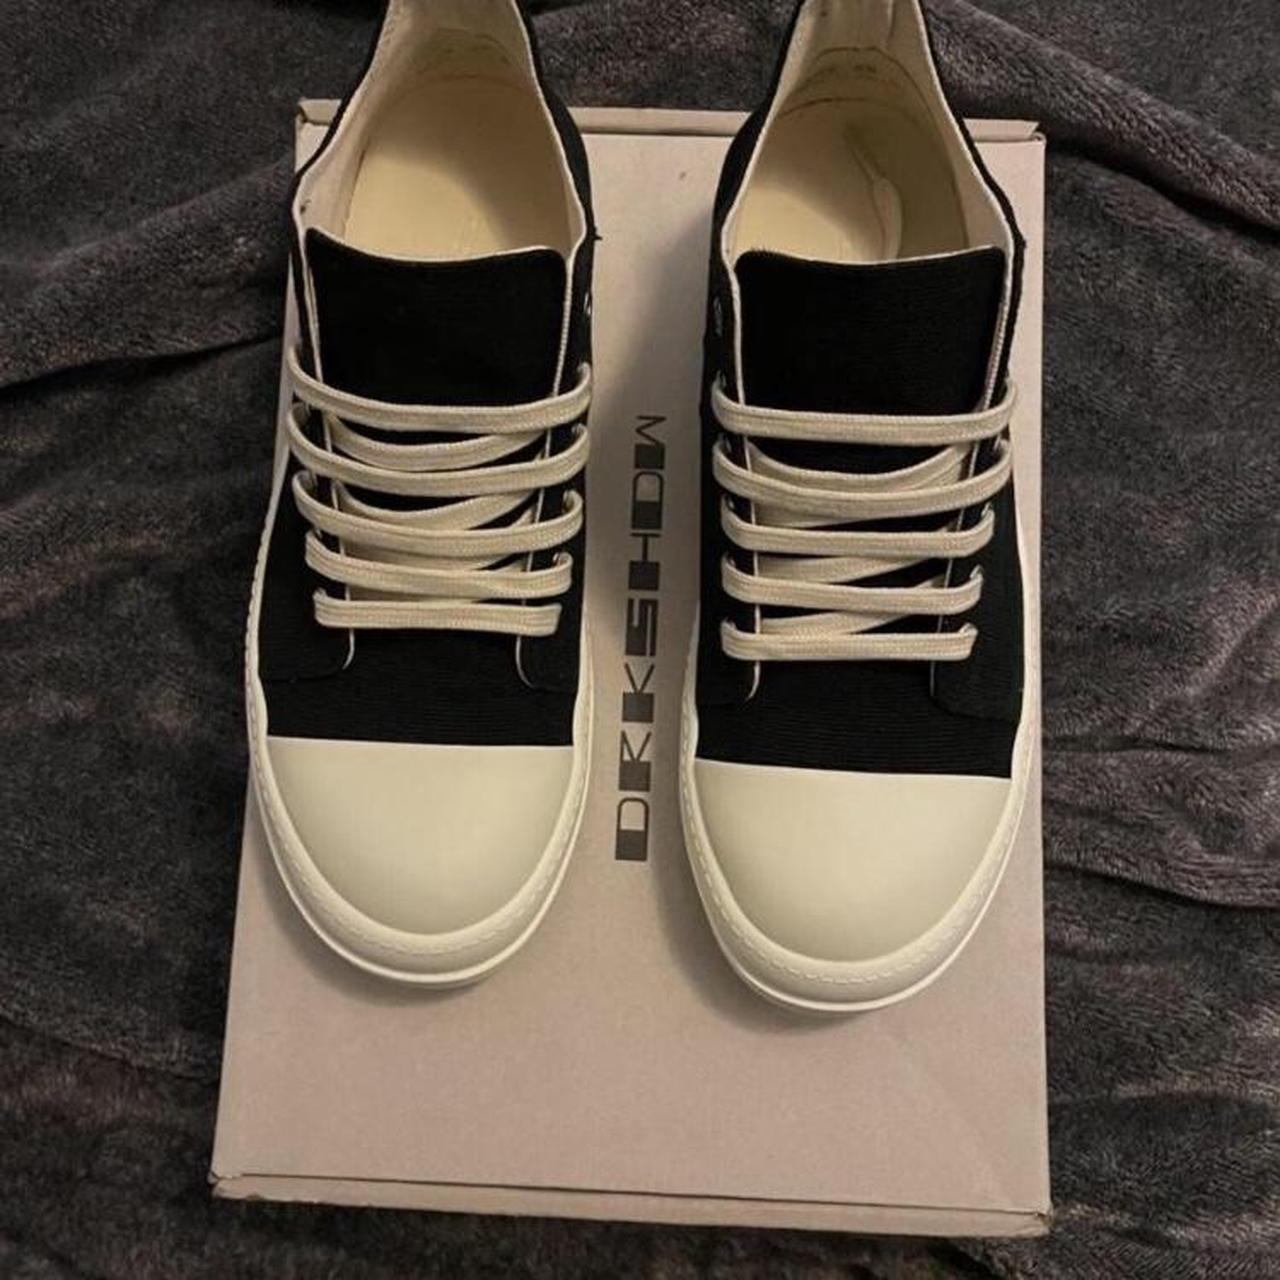 Rick Owens DRKSHDW sz 40 send offers comes with... - Depop